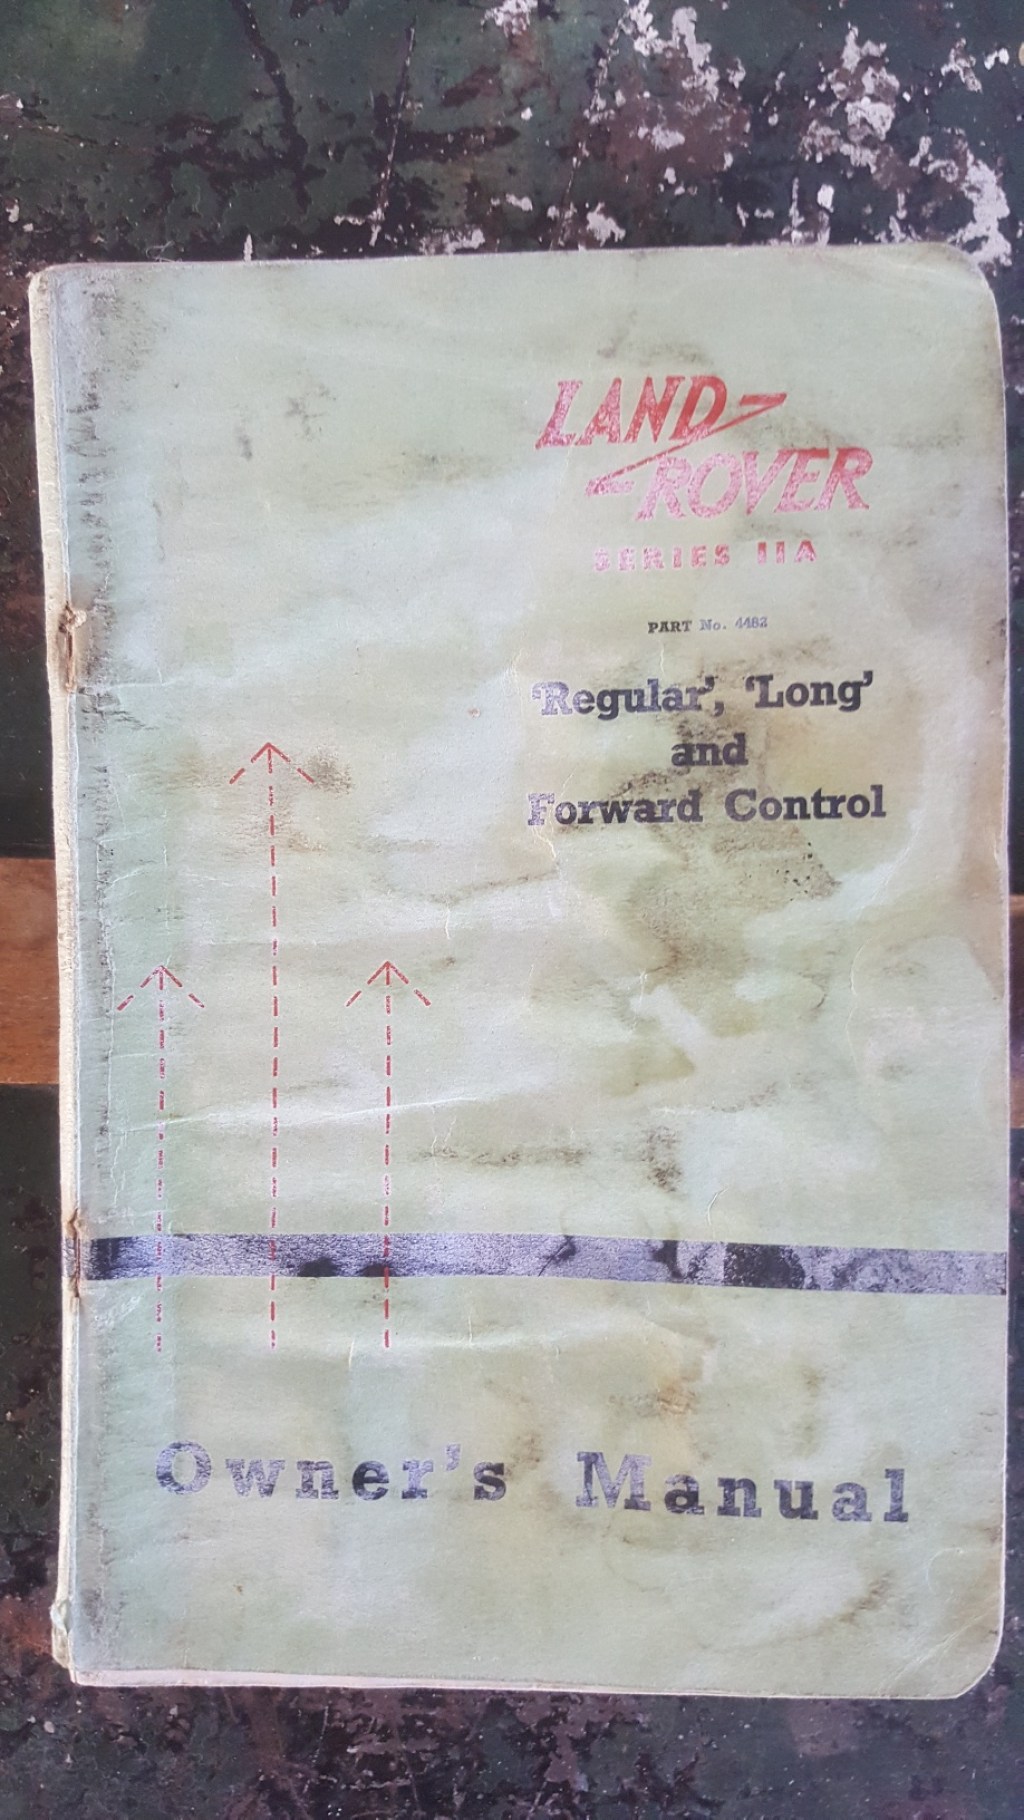 Picture of: Land Rover Series a   Owner’s Manual Regular, Long and Forward  Control 448